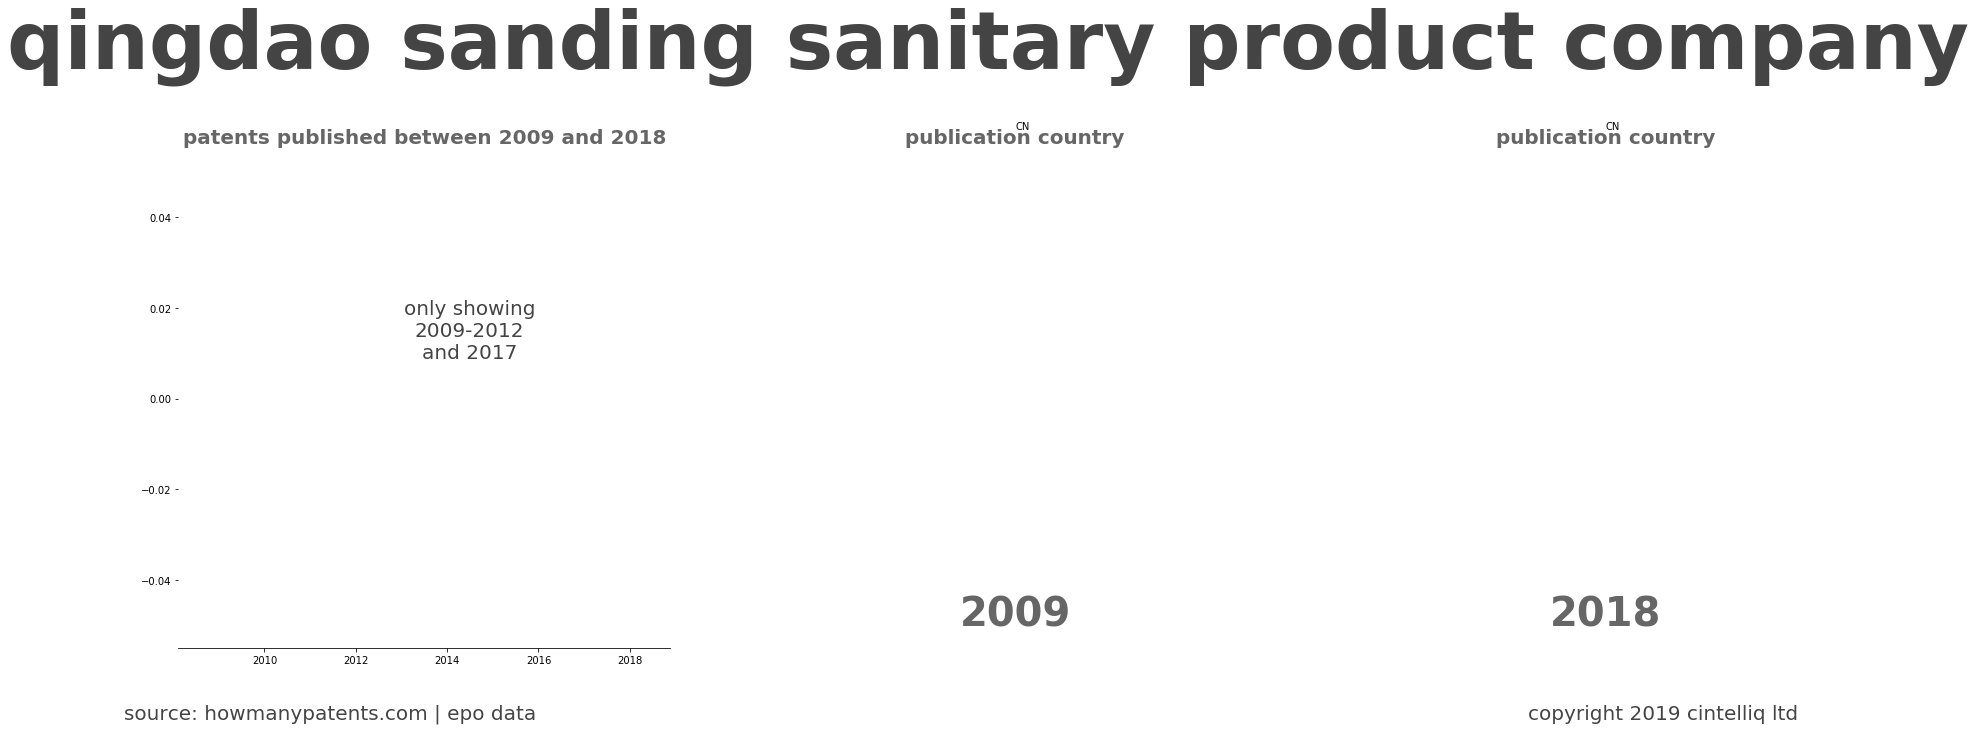 summary of patents for Qingdao Sanding Sanitary Product Company